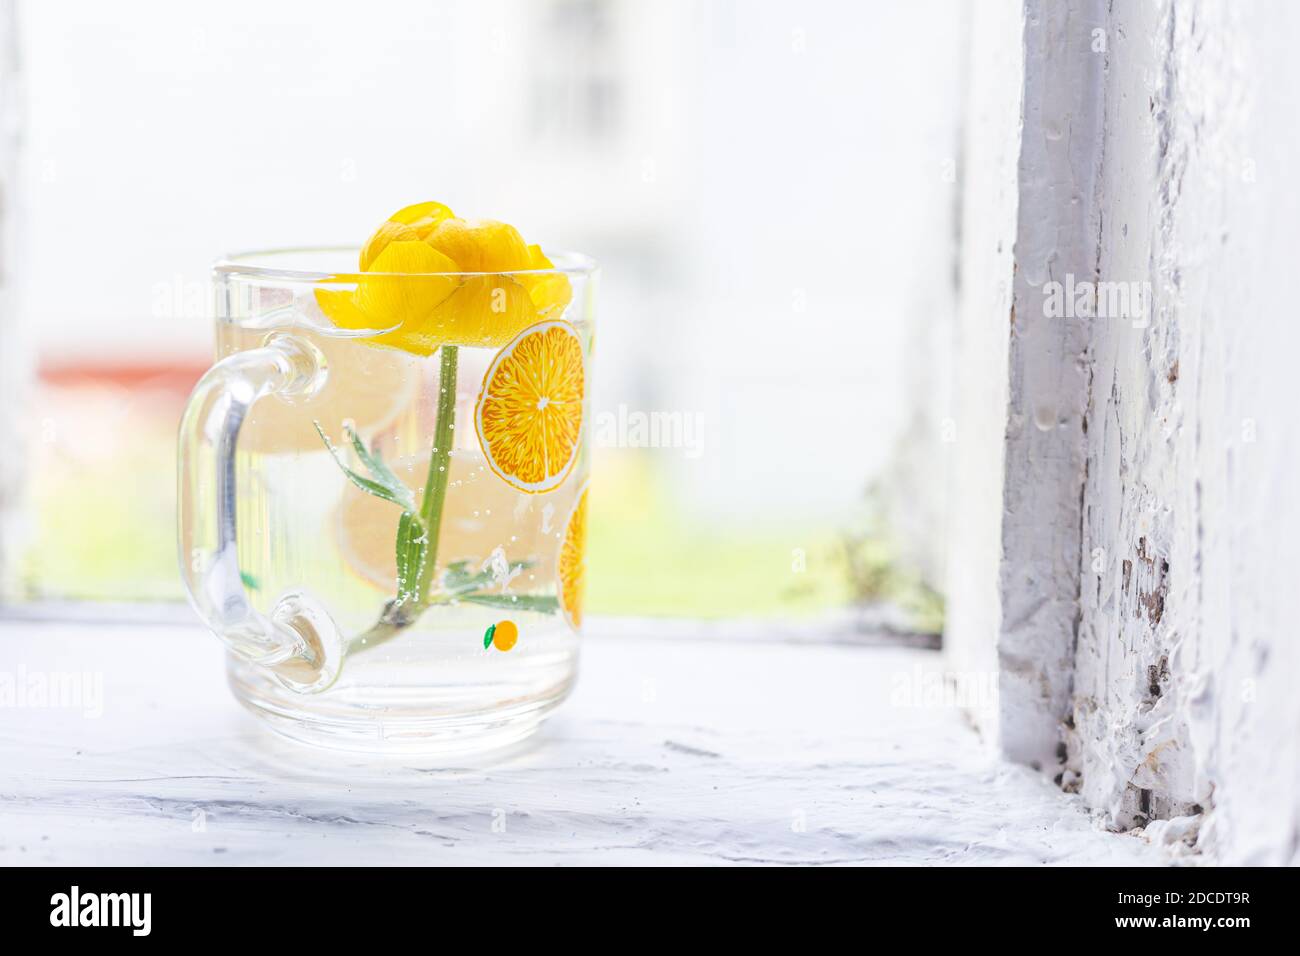 One yellow flower in a glass cup in water on a window in an old country house, a white window sill and frame. Spring morning, natural light. Stock Photo